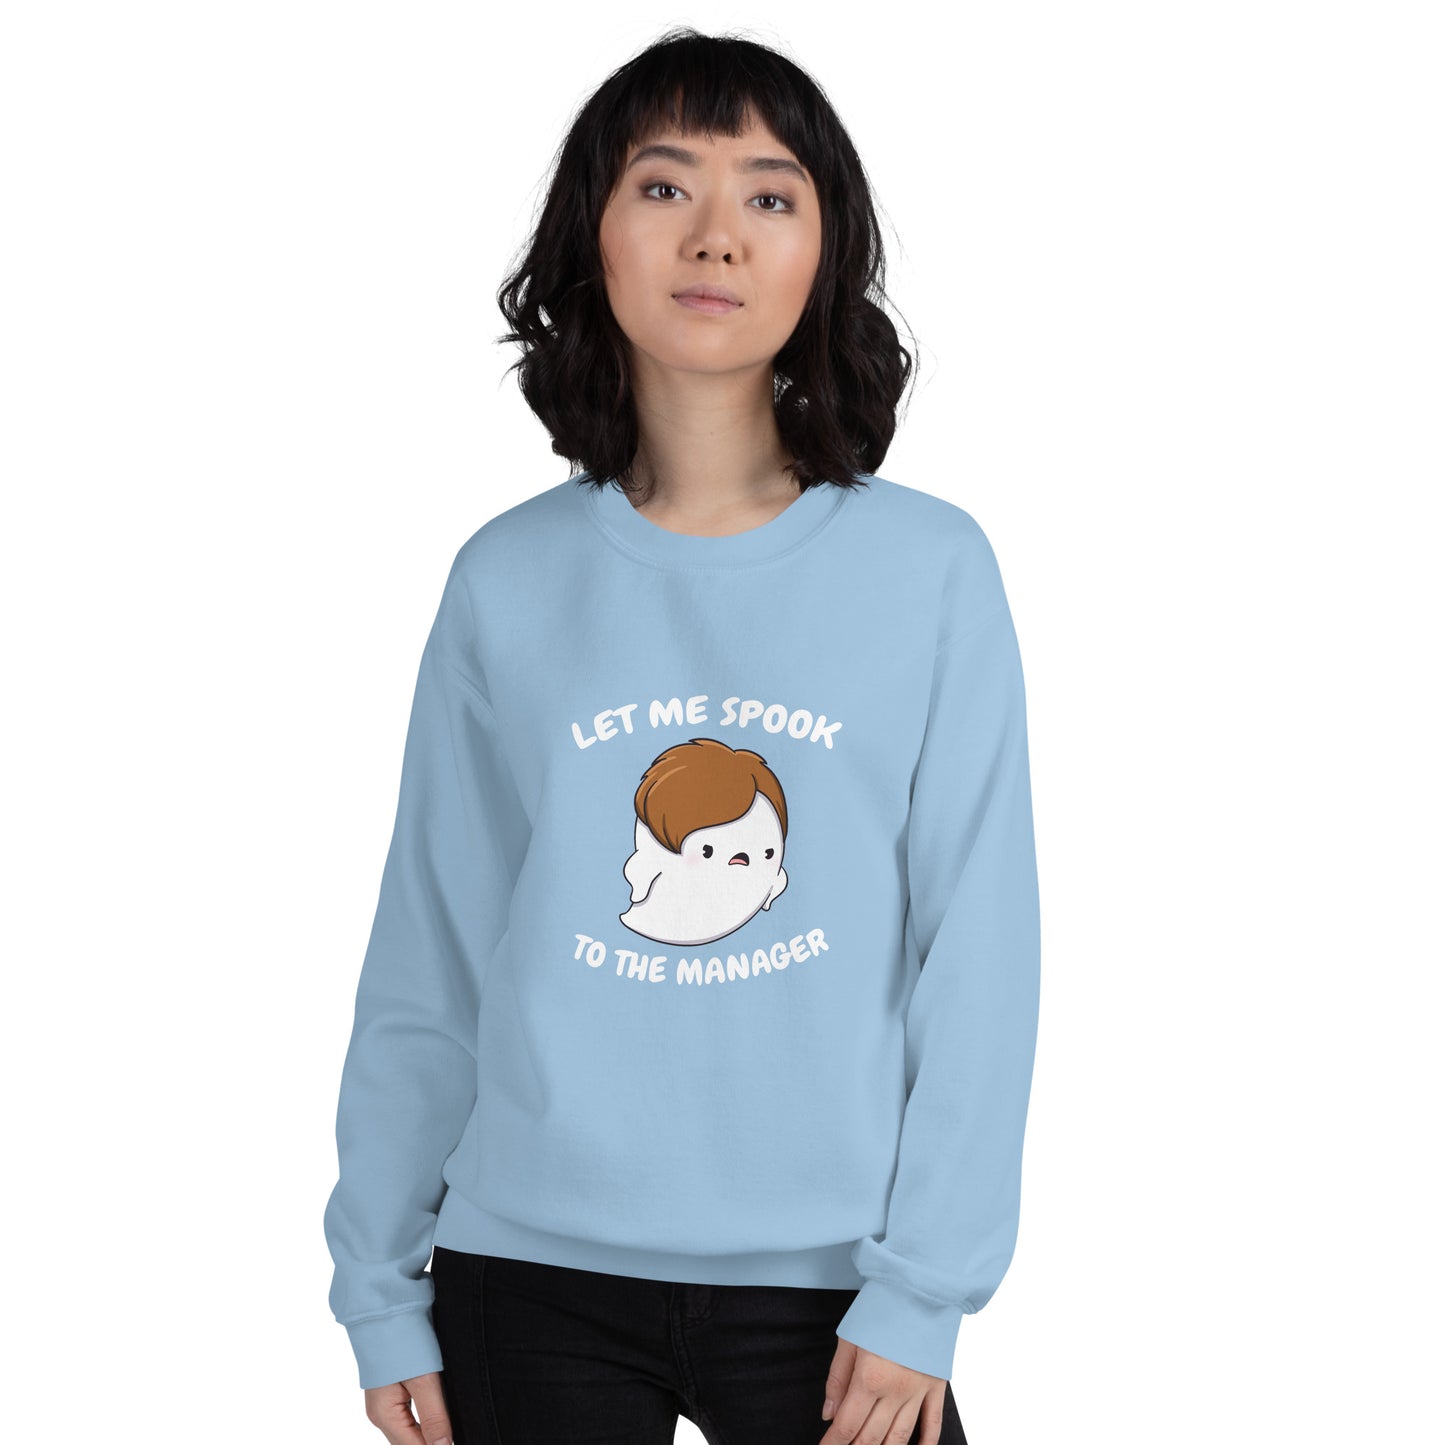 Let me spook to the manager - Unisex Sweatshirt